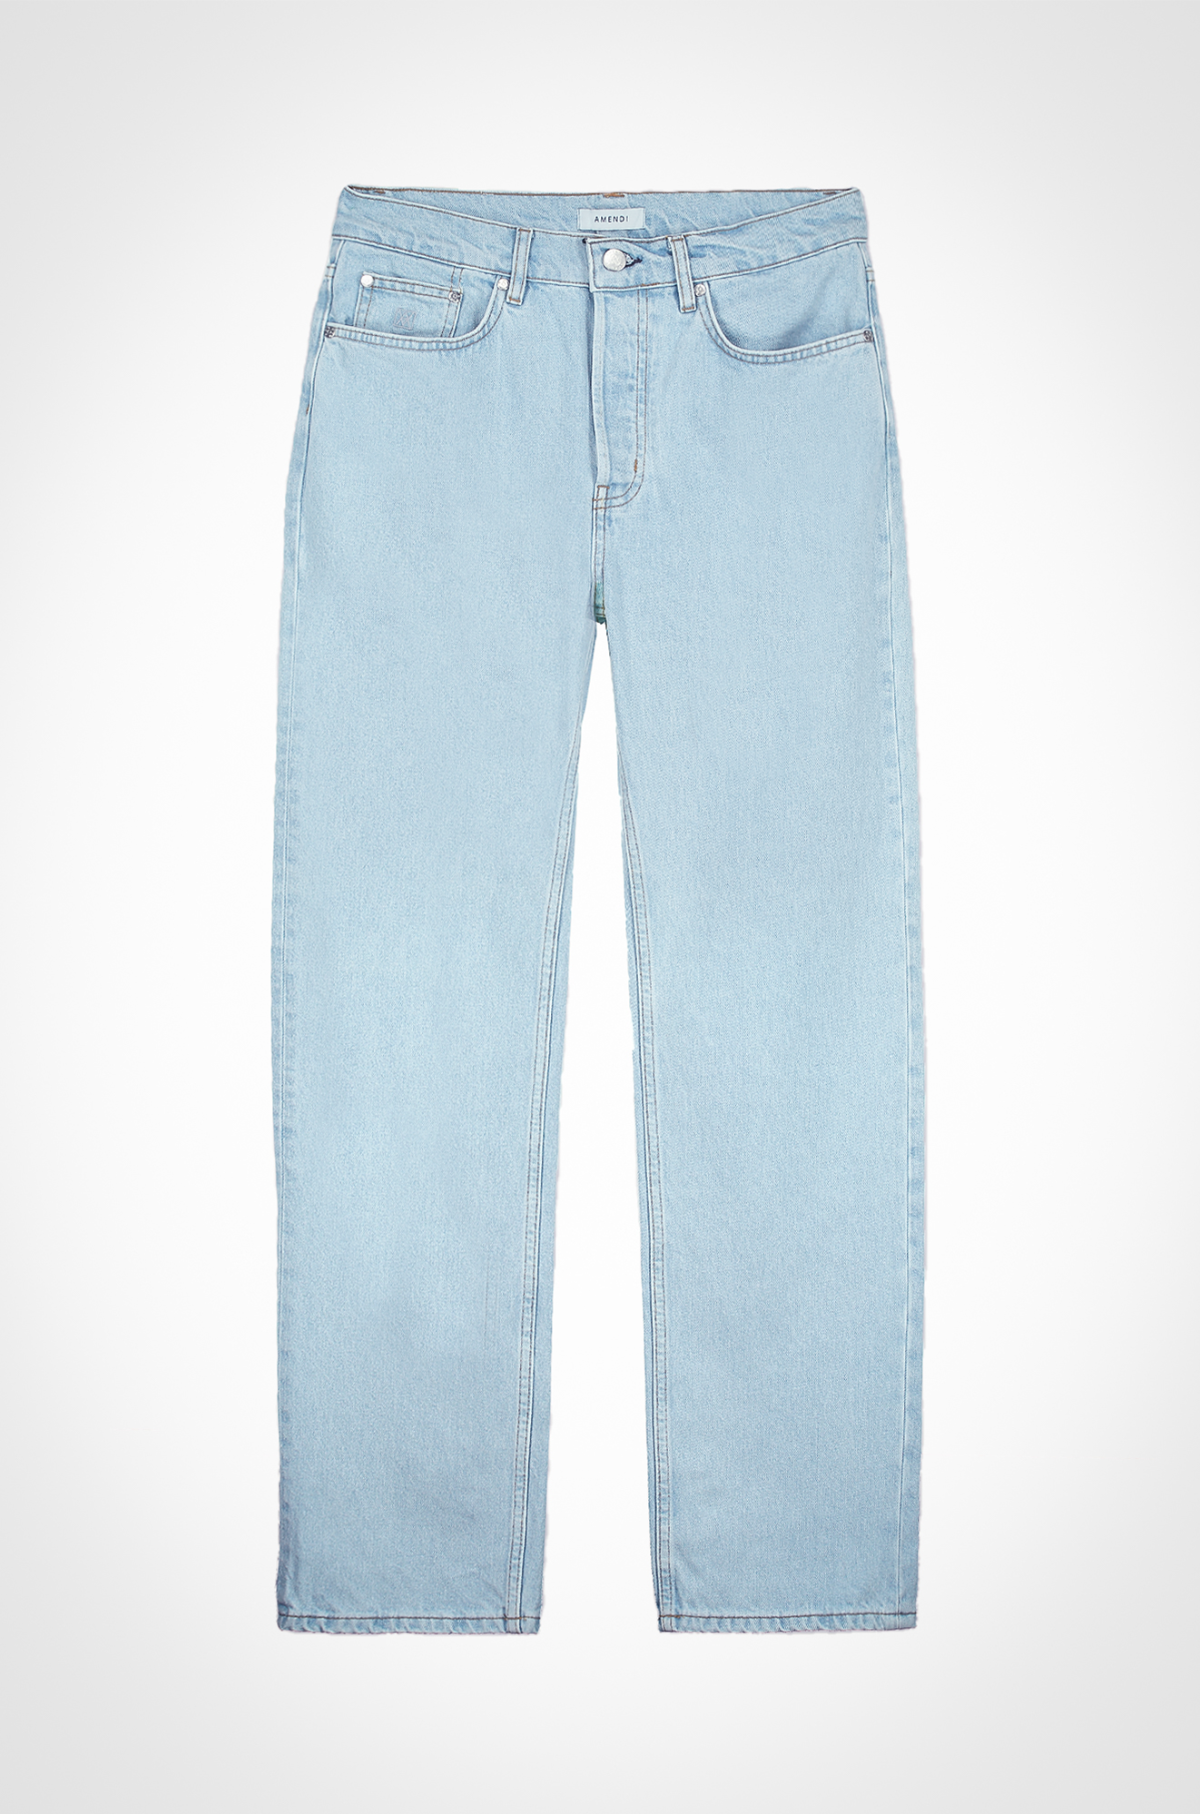 Bob - Bright Eyes - Straight Fit Jeans